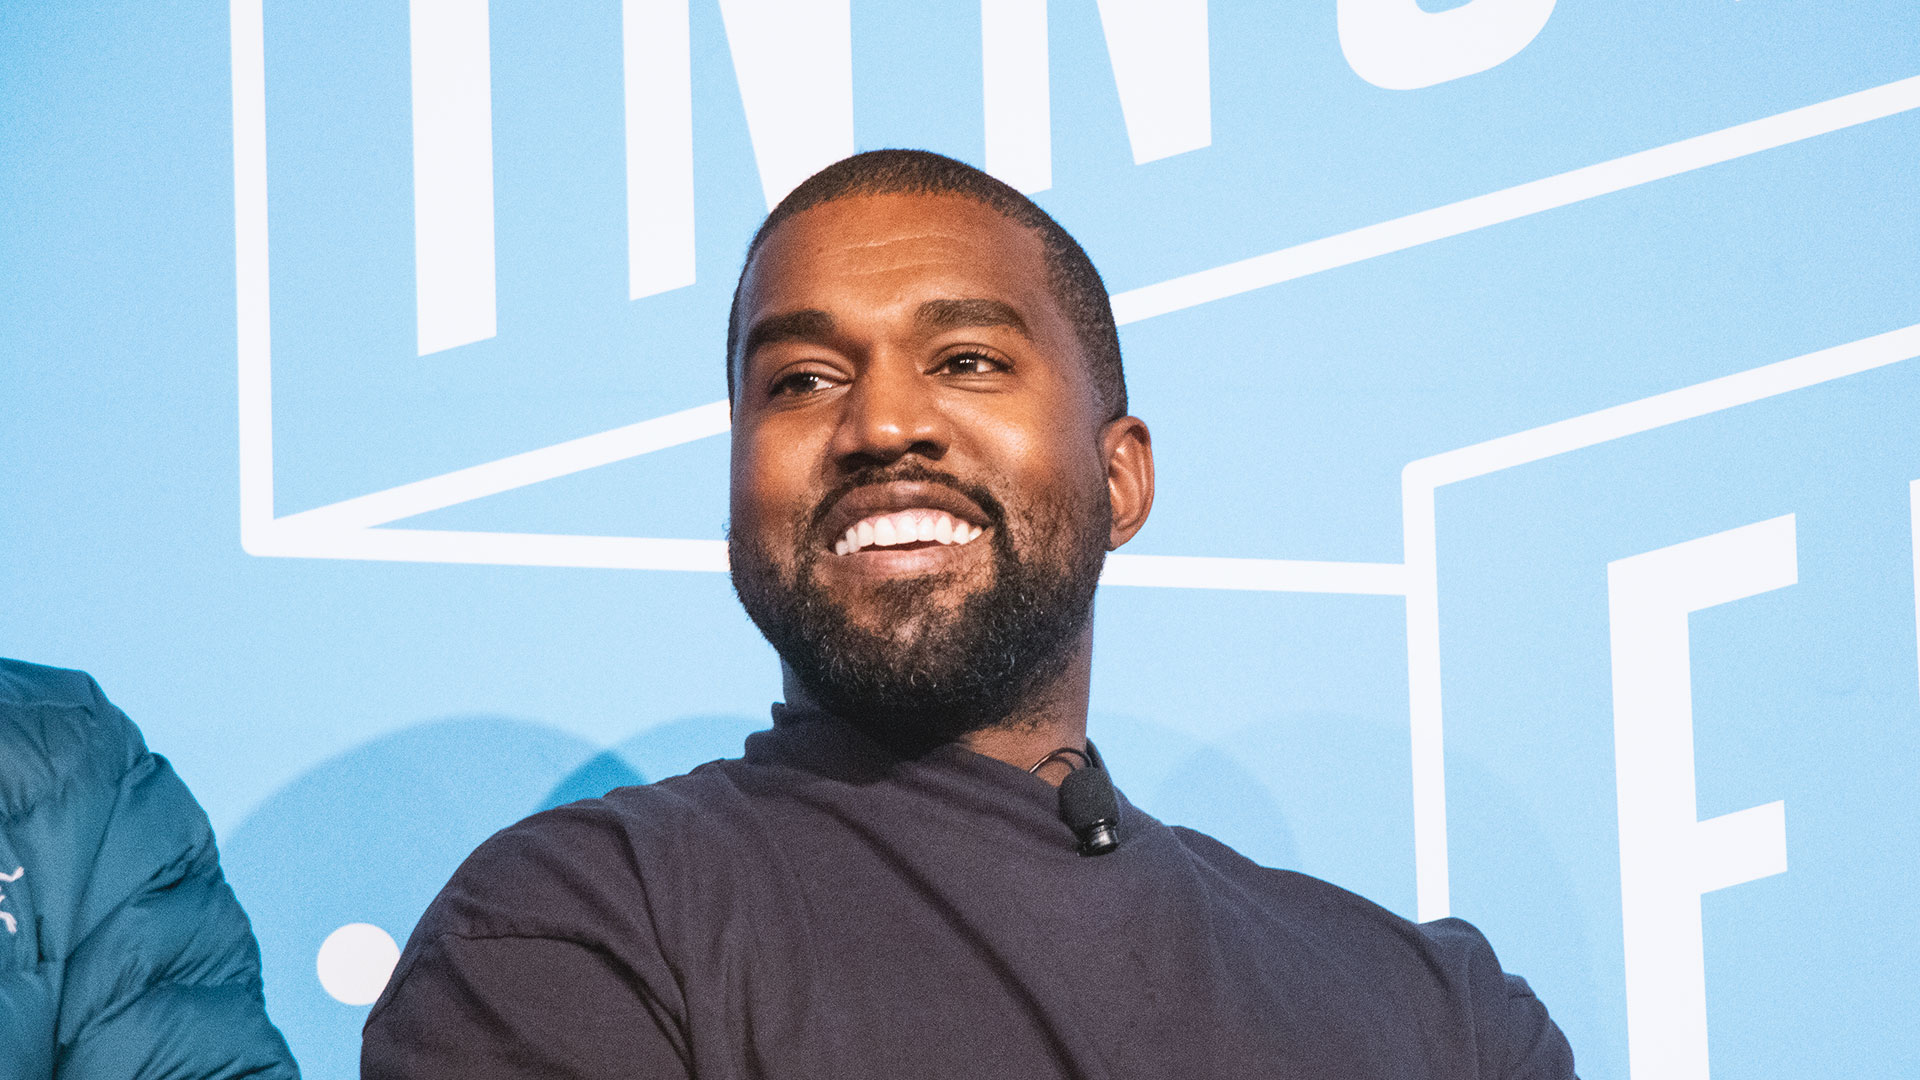 A Multiyear Partnership Between Kanye West And Gap Is Finally